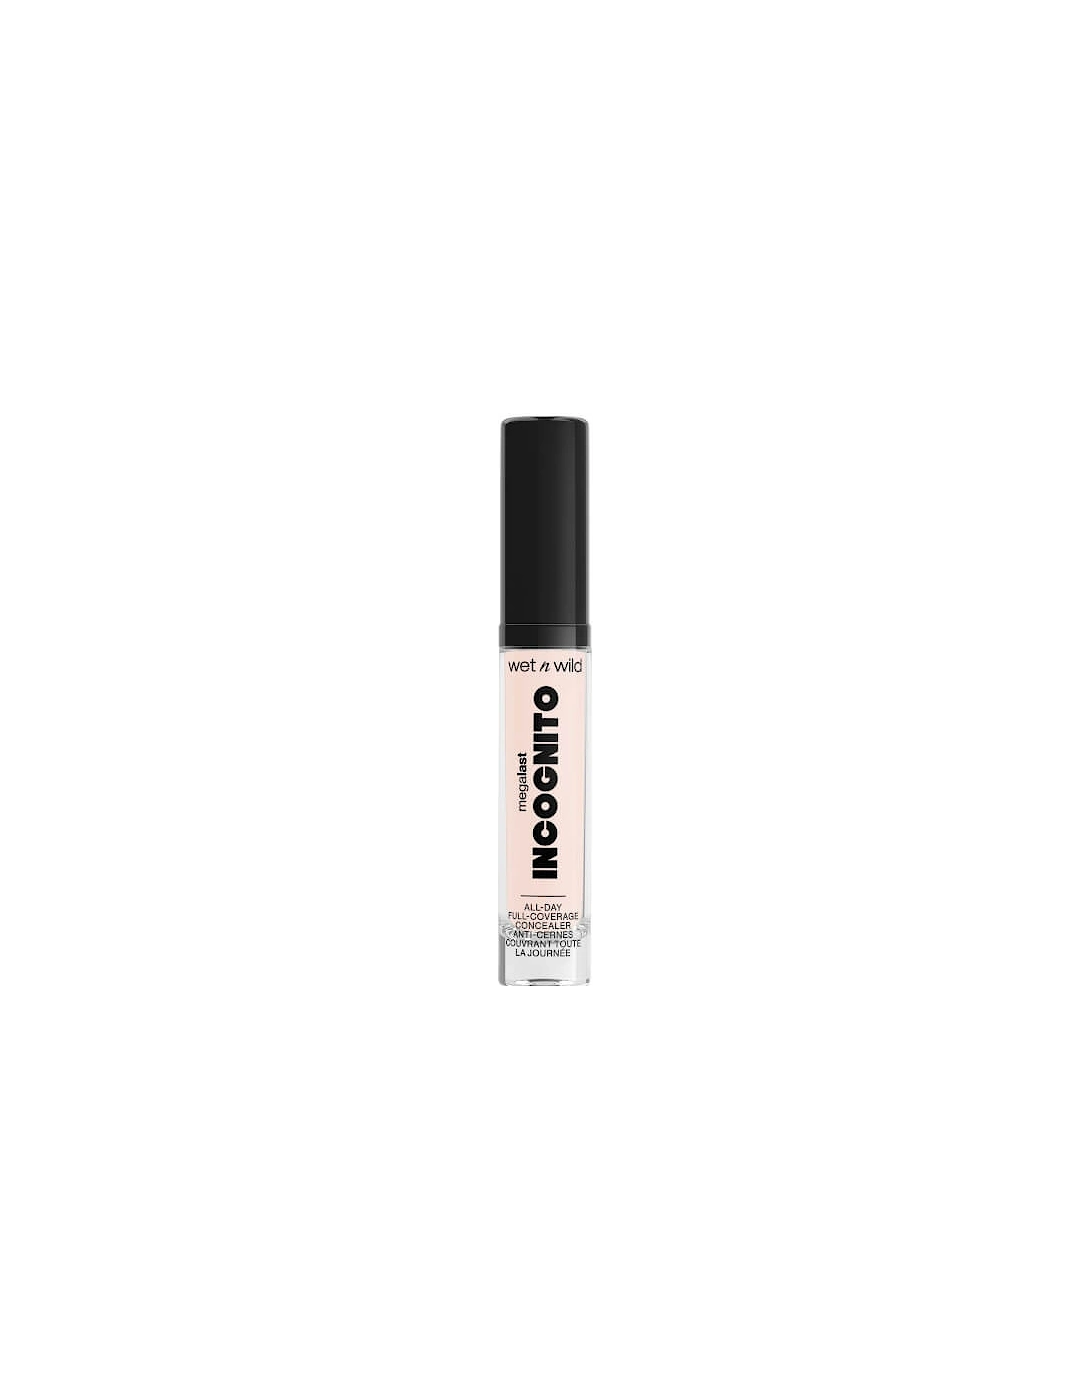 wet n wild Megalast Incognito Full-Coverage Concealer - Fair Beige, 2 of 1